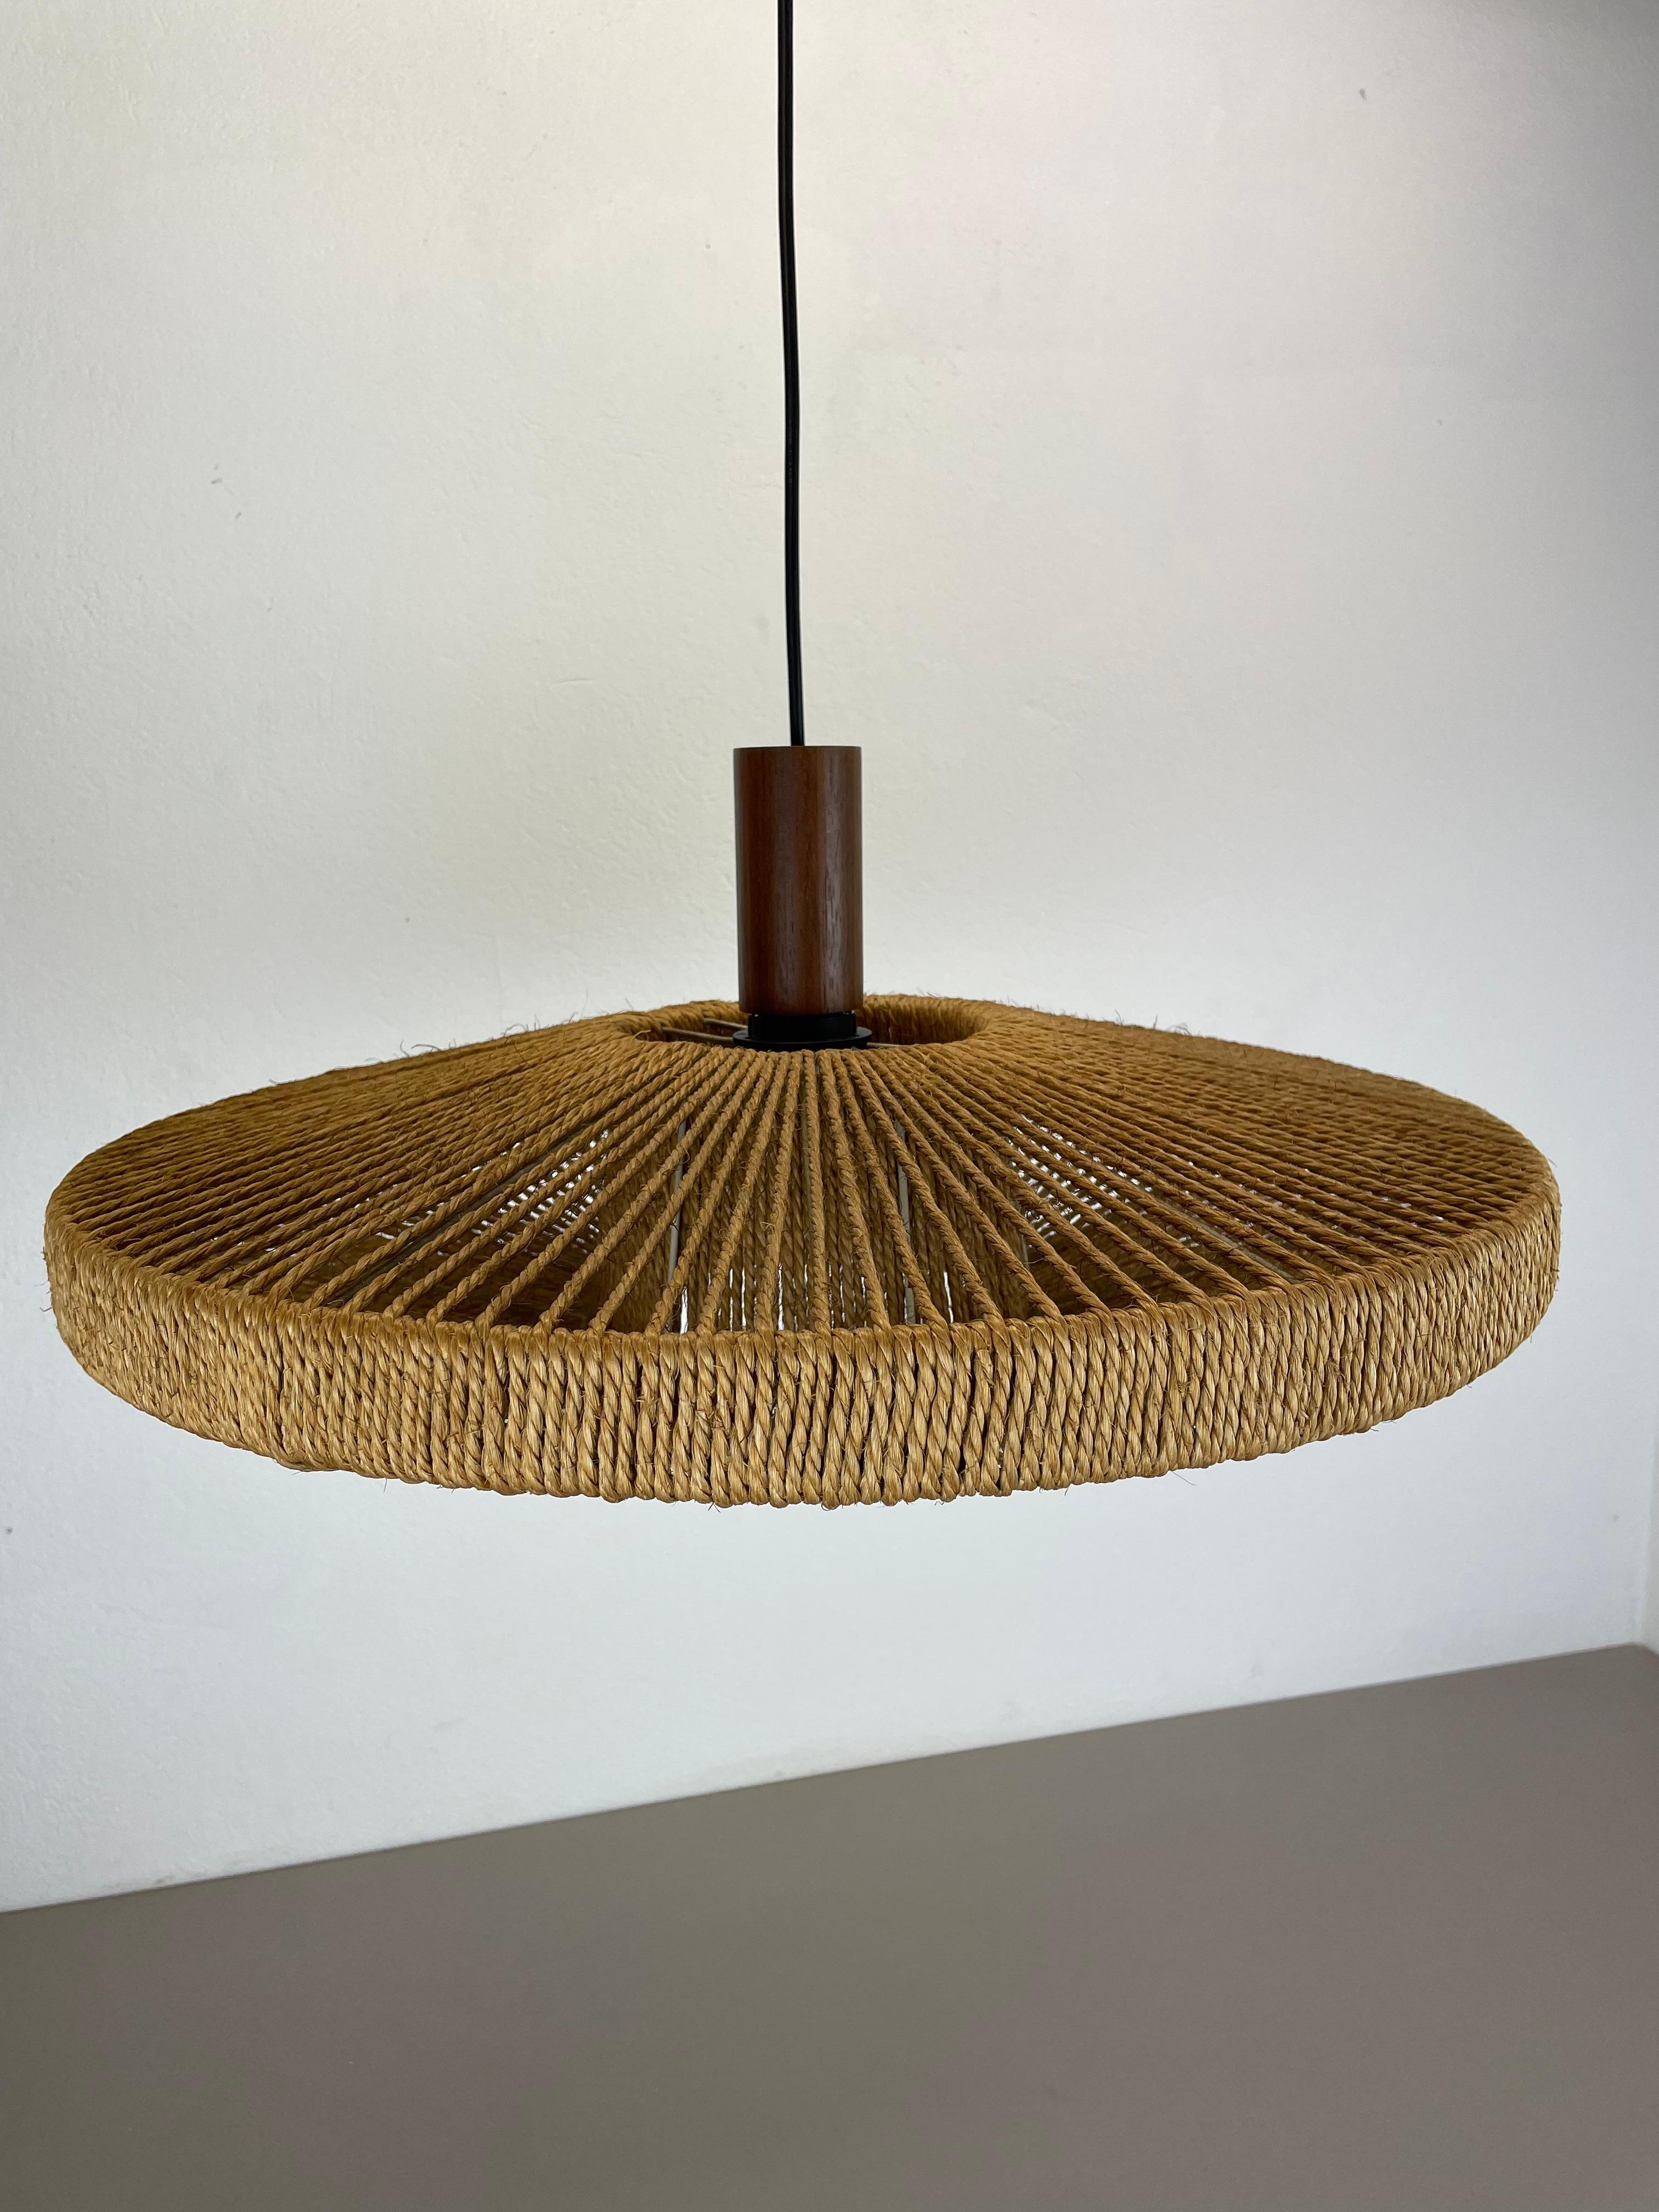 56cm Organic Sisal and Teak Ufo Hanging Light Made by Temde Lights Germany 1960s For Sale 2